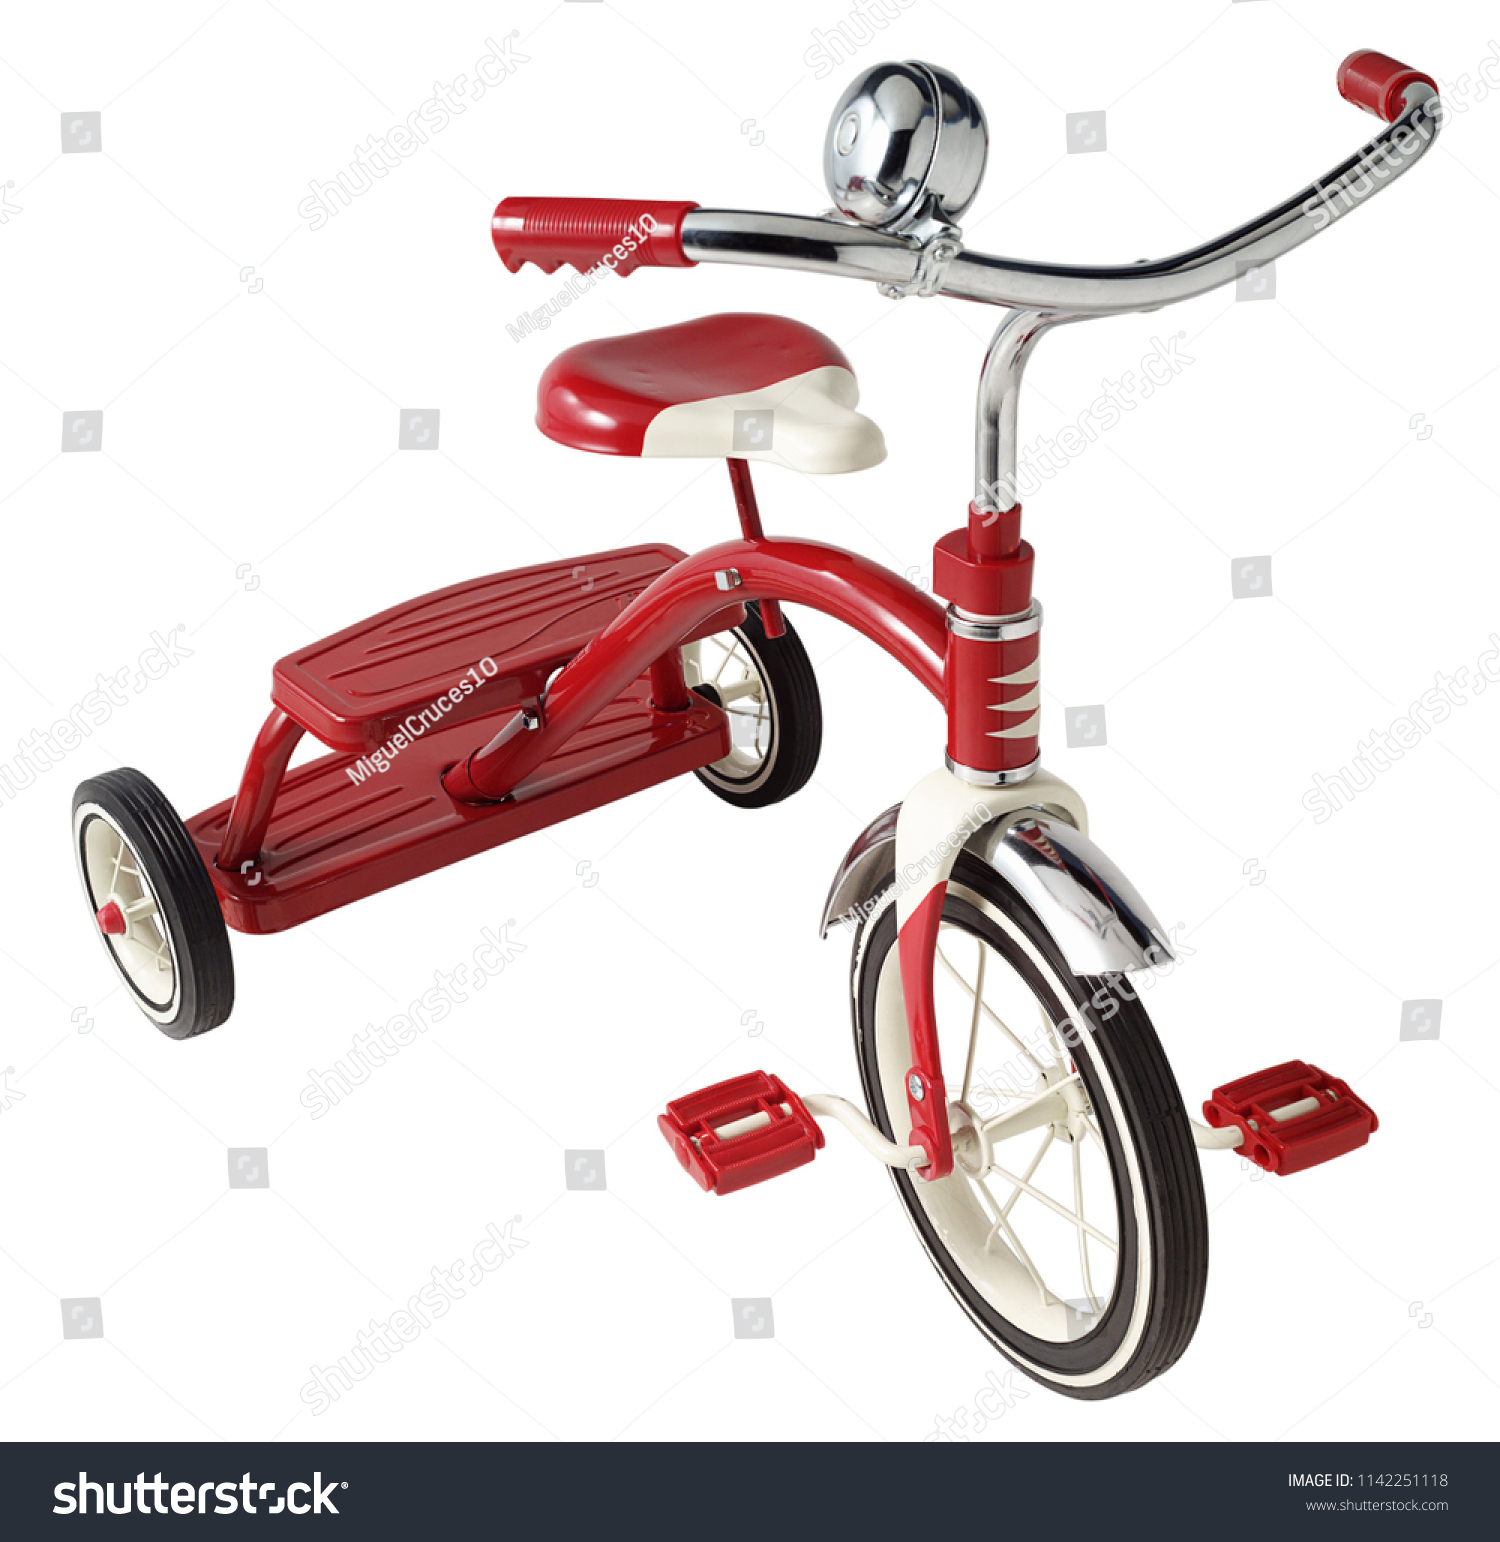 vintage childs tricycle